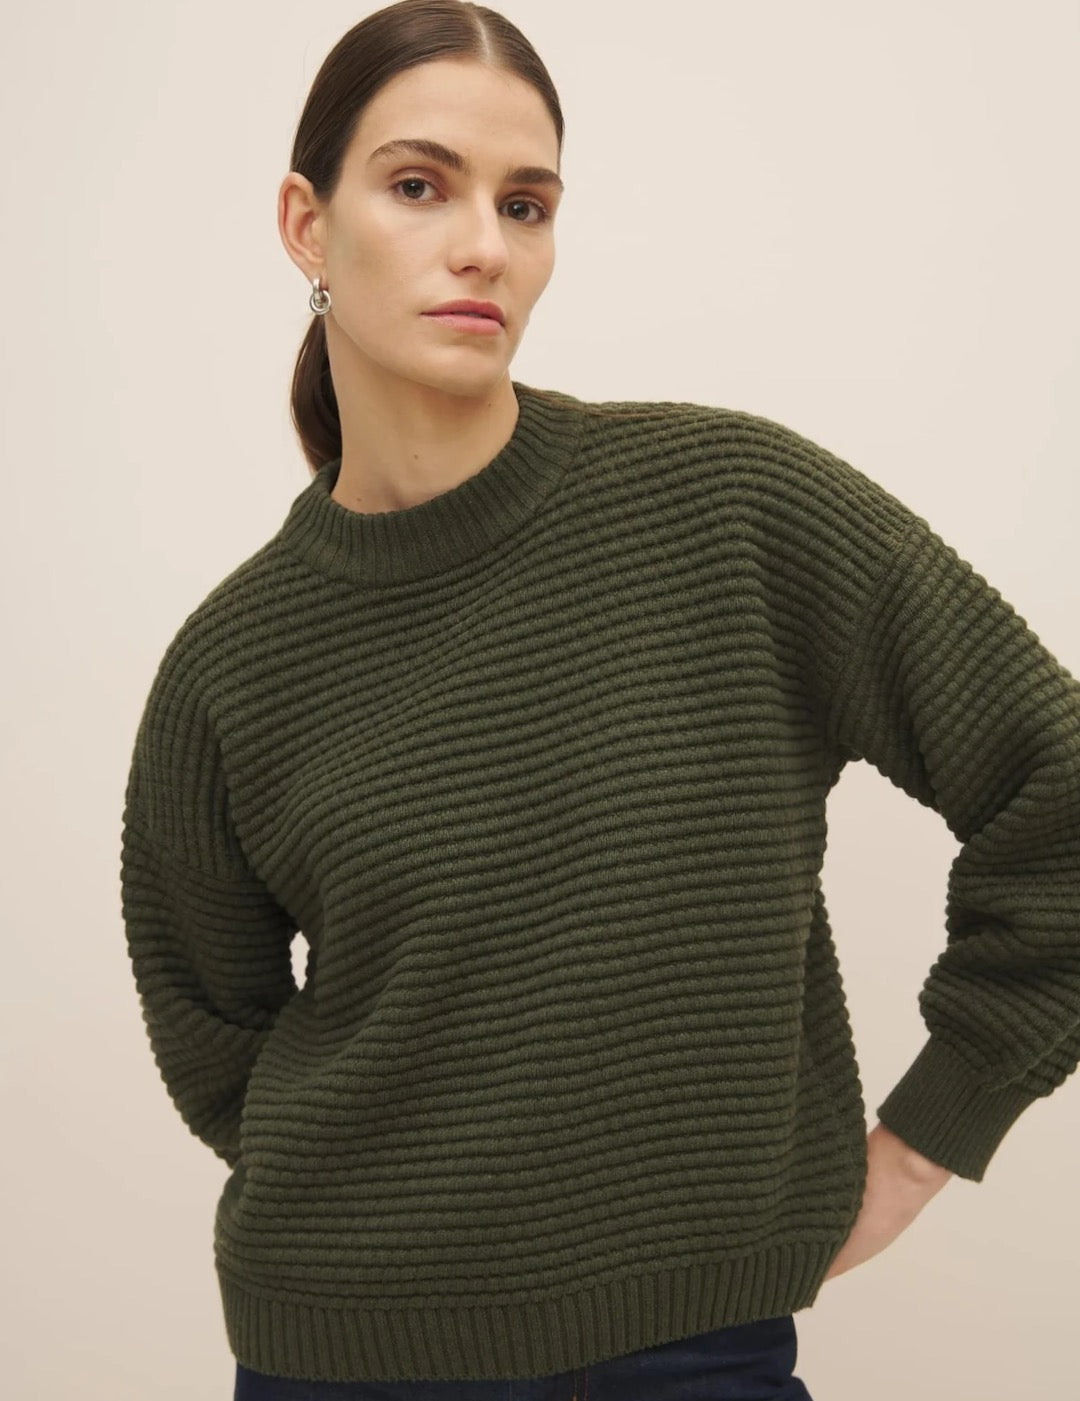 Woman posing in a Kowtow Bubble Jumper – Khaki Marle with balloon sleeves and a neutral background.